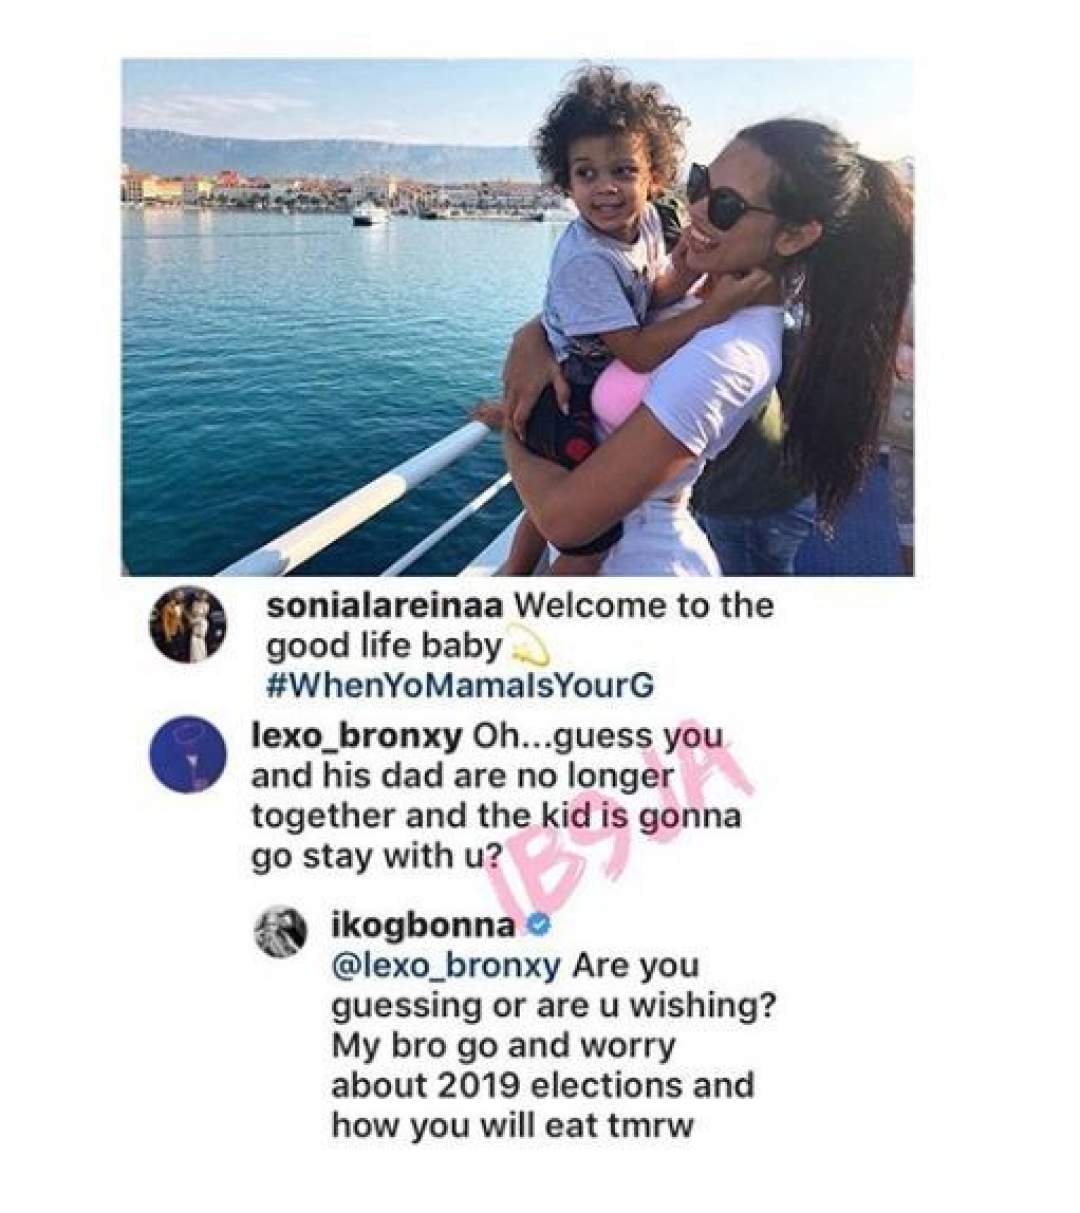 IK Ogbonna drags nosy troll who thinks his marriage has crashed